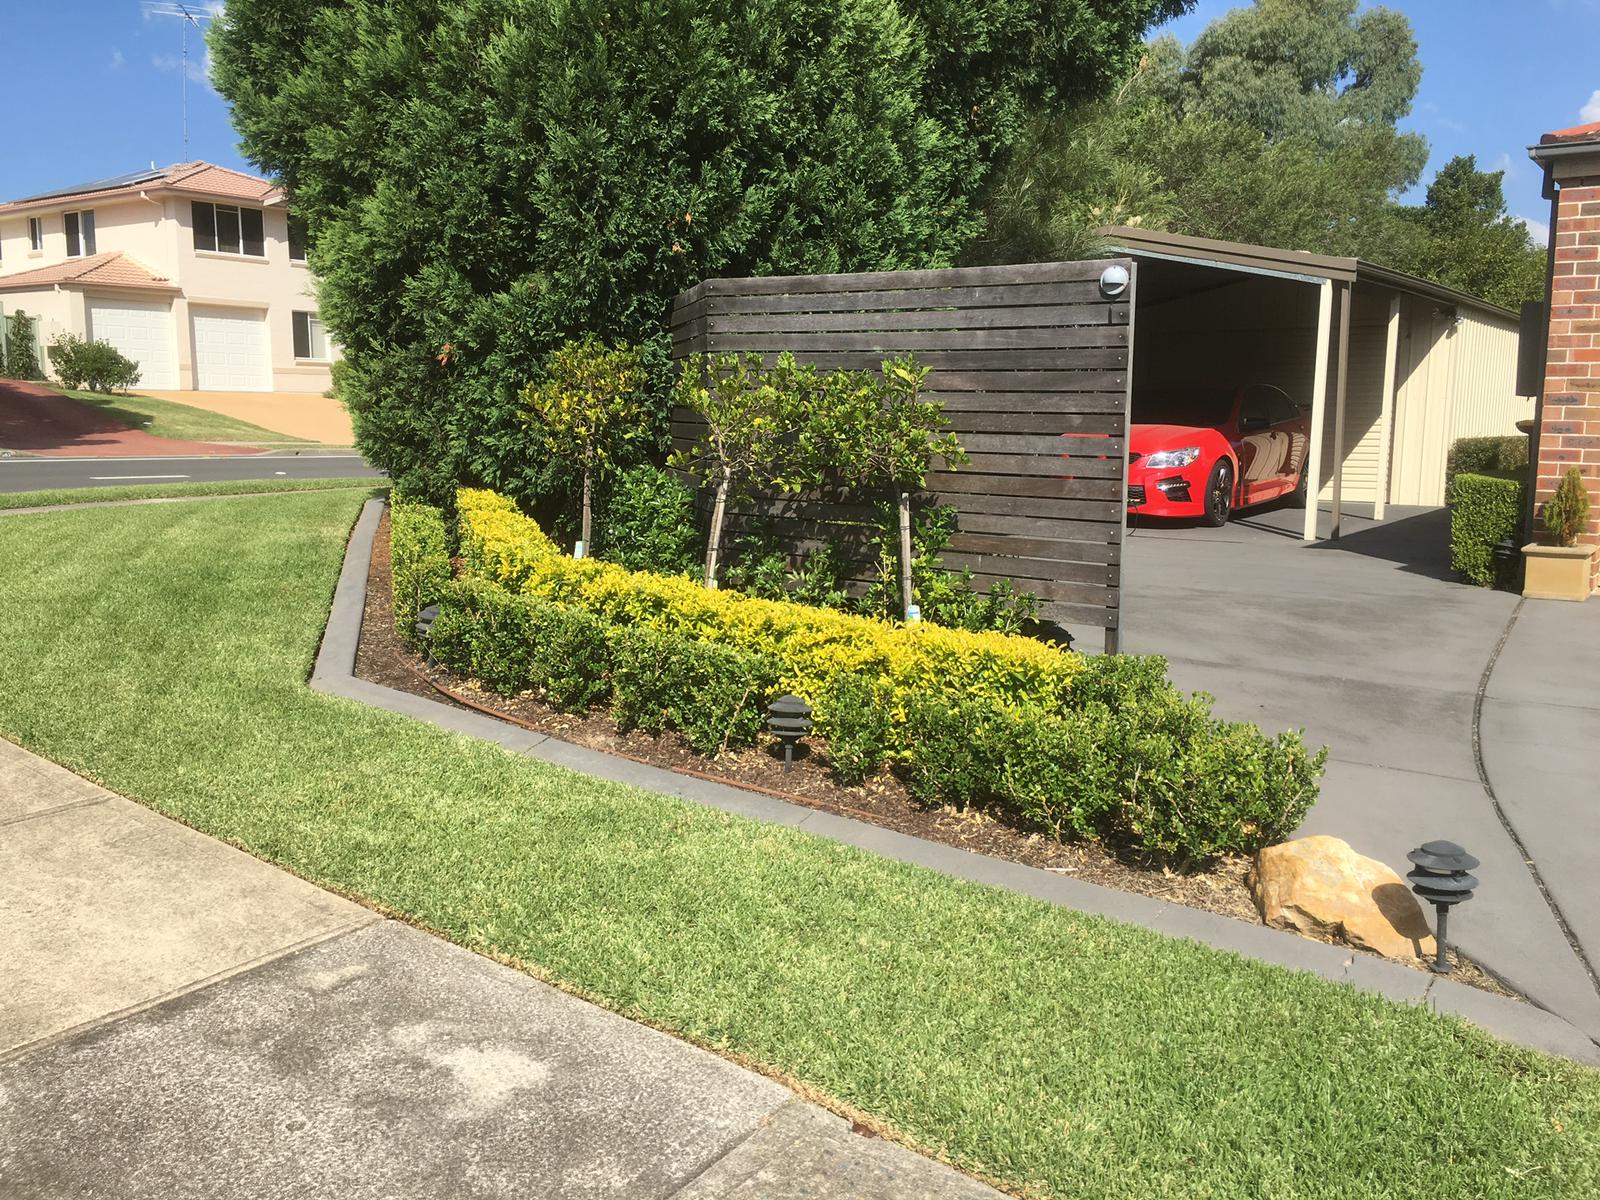 Garden maintenance job in Dural with a red car in the background